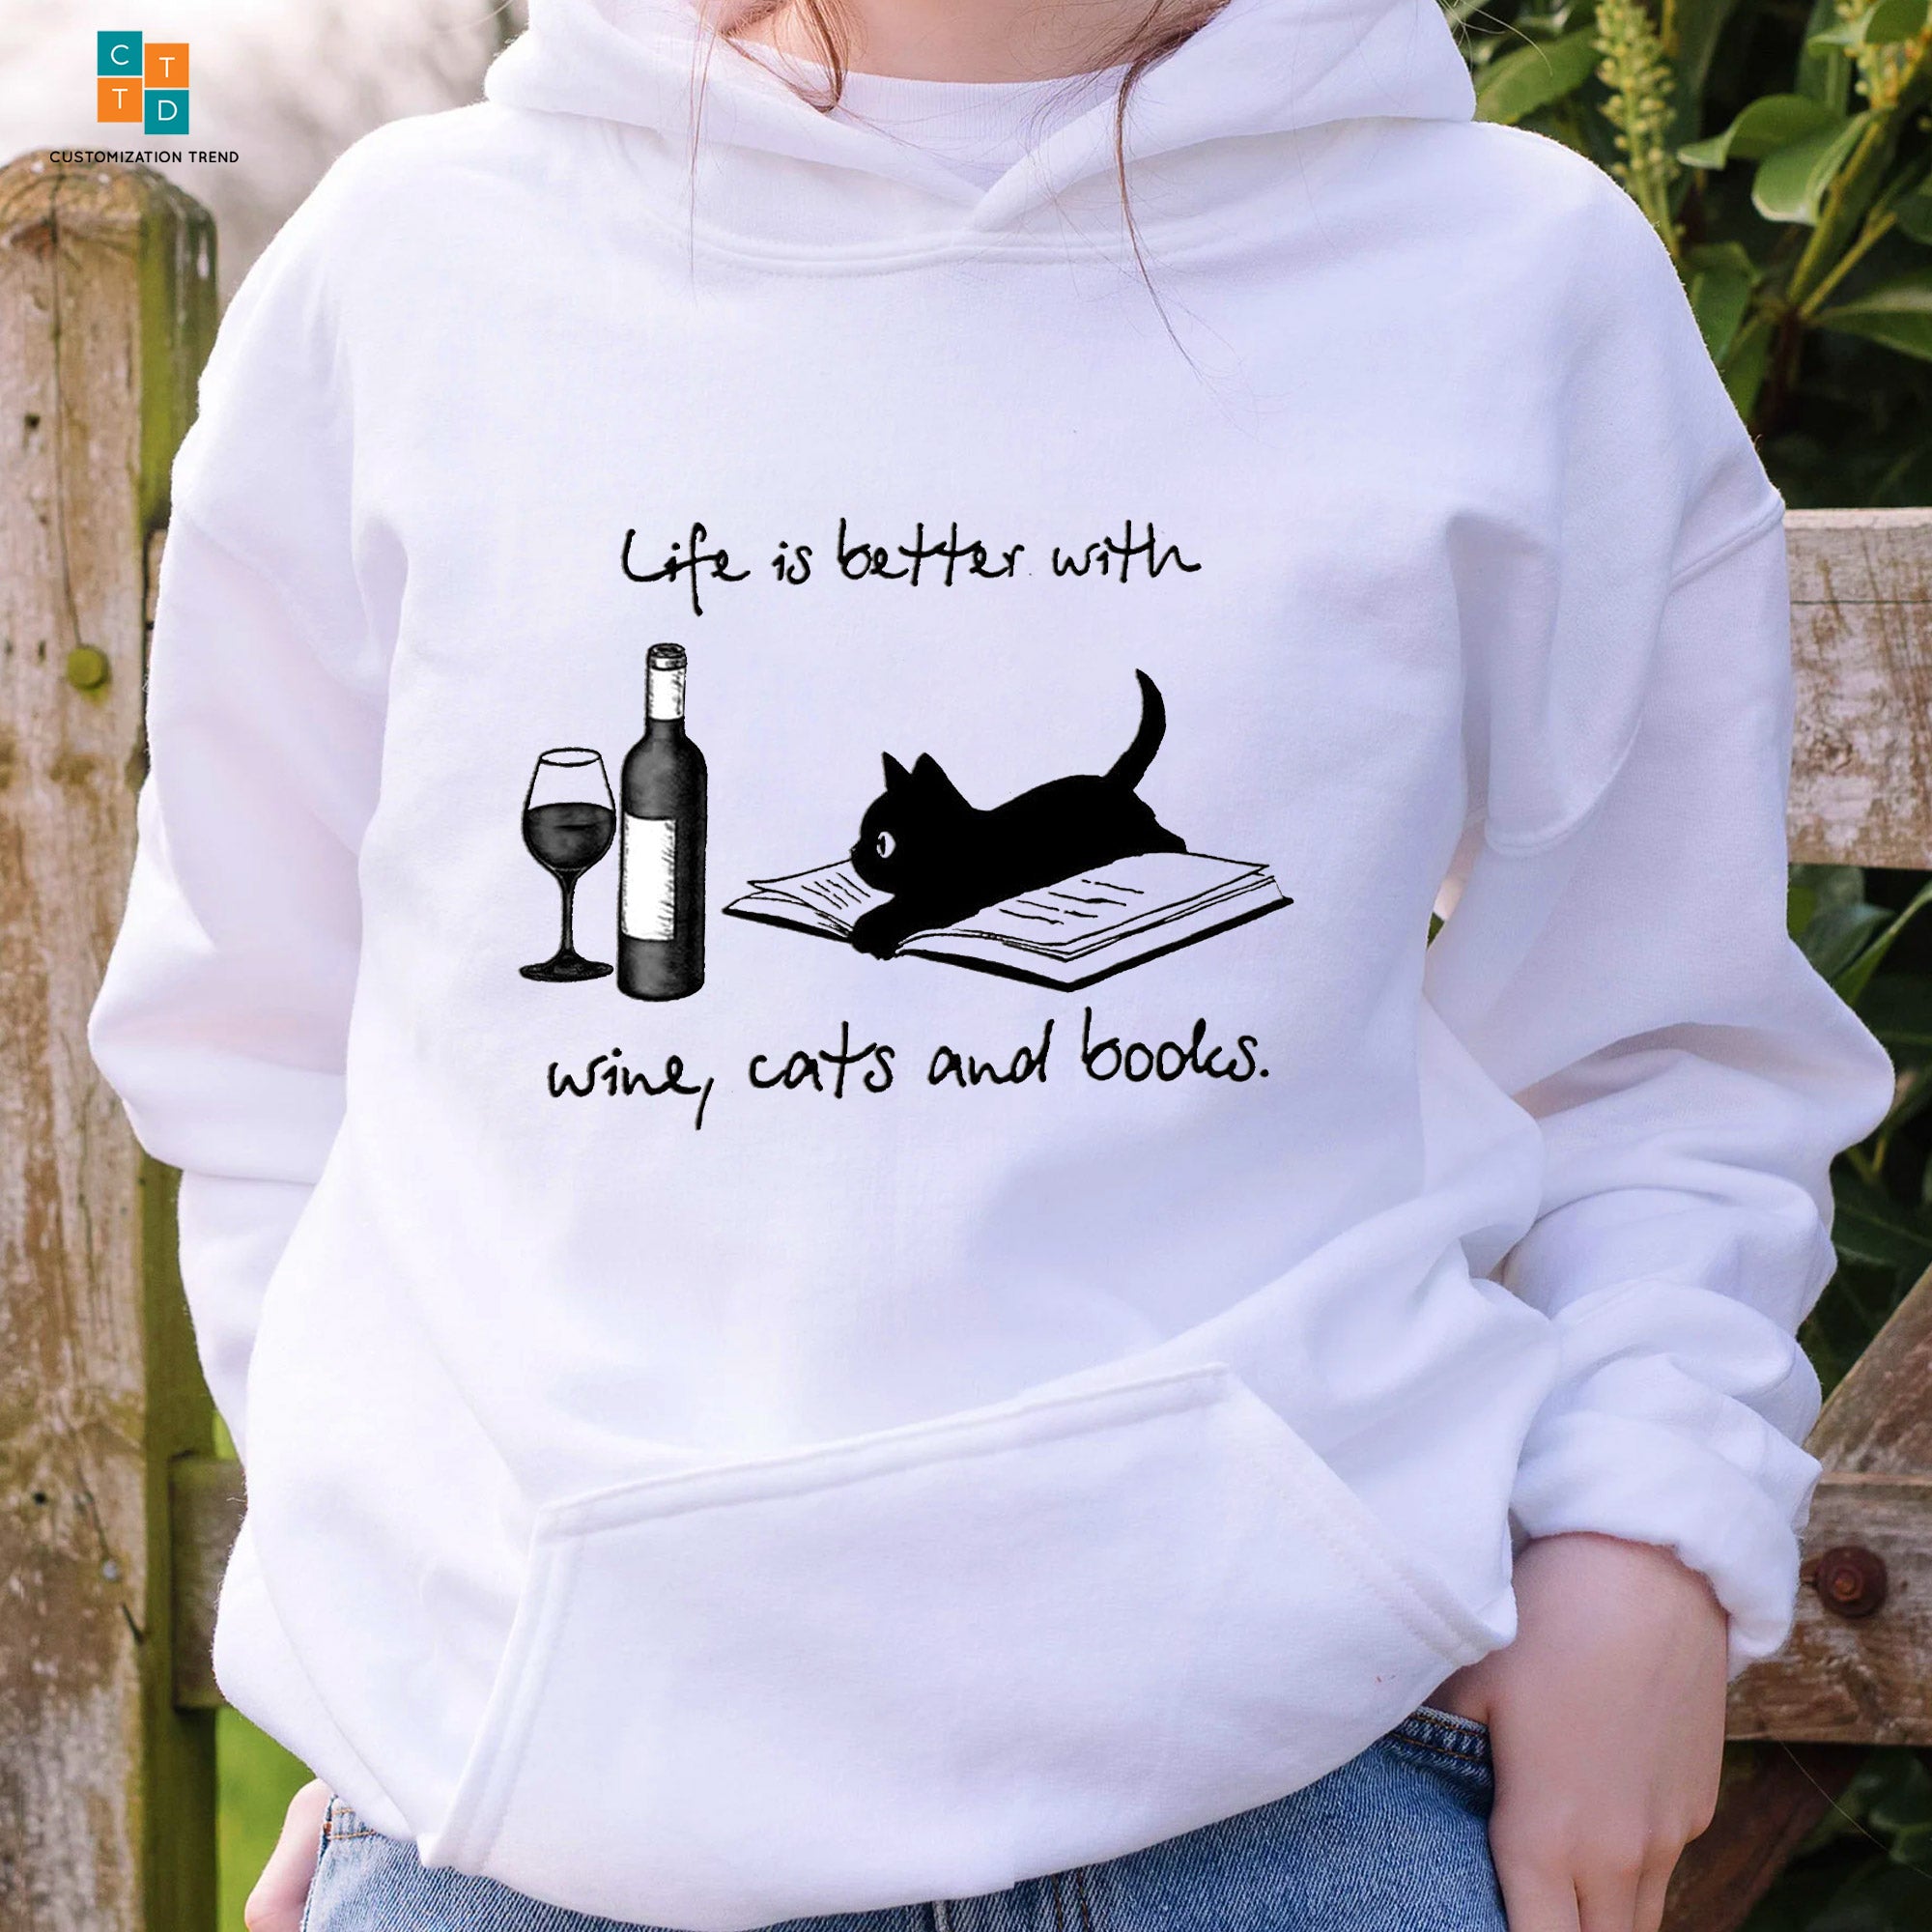 Life Is Better With Wine, Cats And Books Hoodie, Shirt